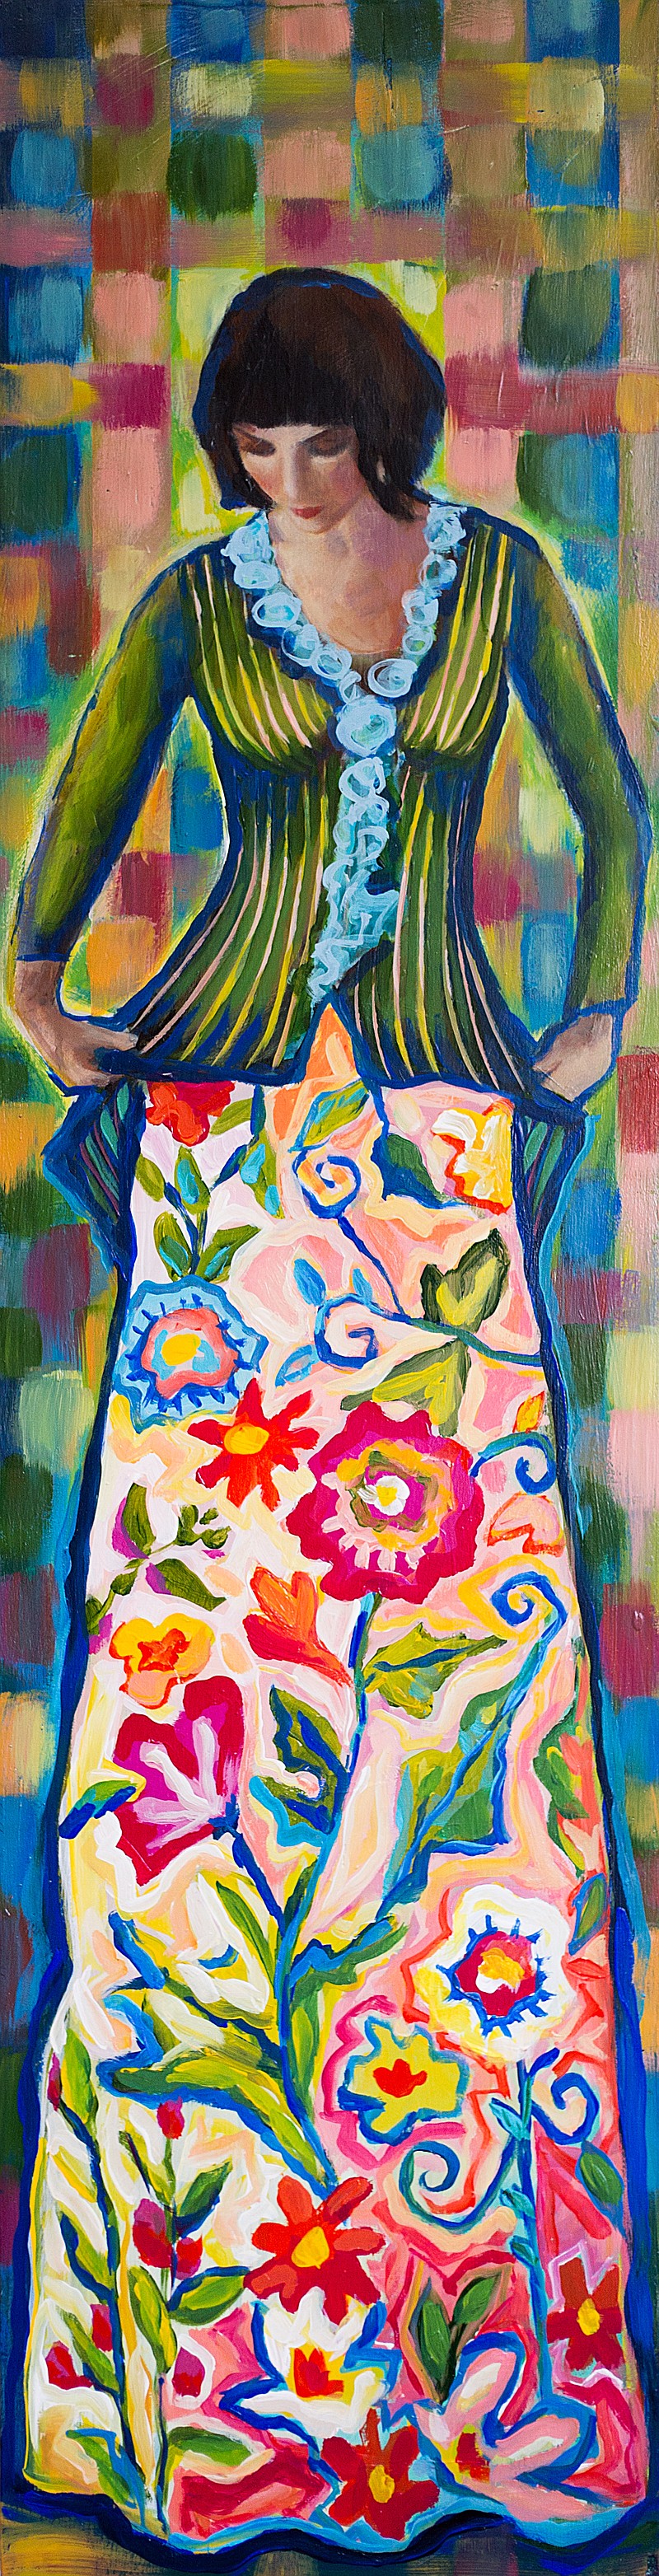 Reservations are requested by Wednesday, March 15, for the Creative Arts Guild's annual Spring for the Arts fundraiser, an event where art meets fashion, represented here by this Paula Plott Gregg painting.